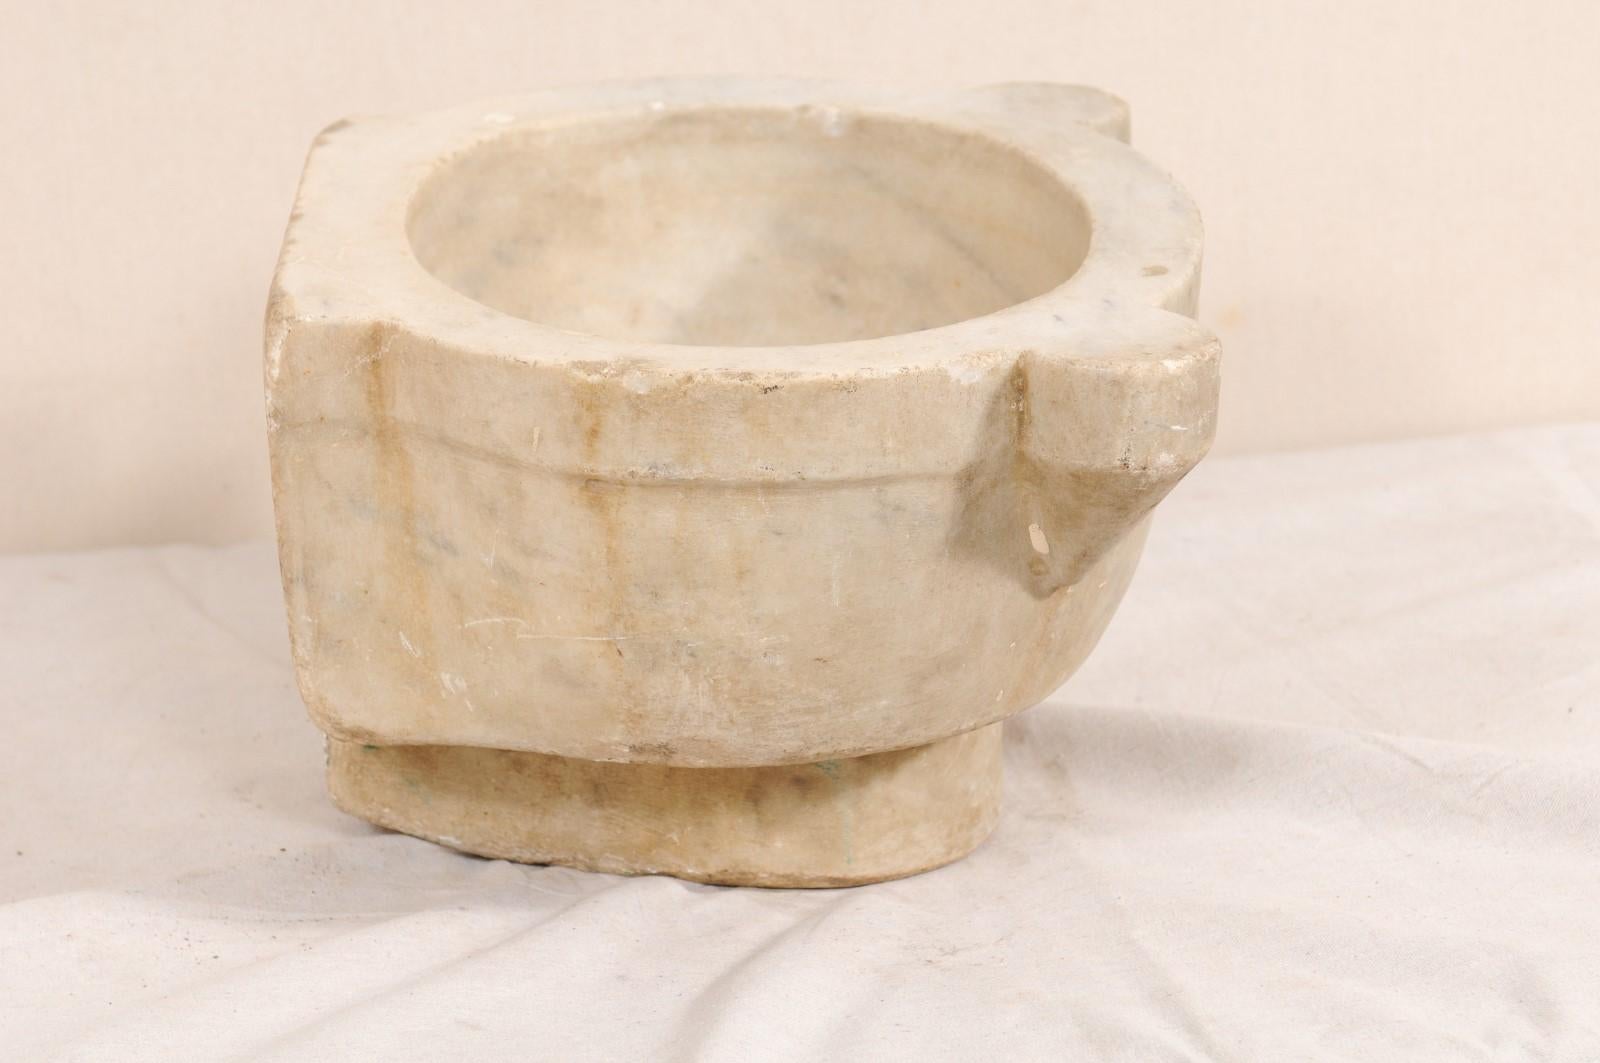 A smaller-sized Turkish hammam wash basin of marble from the 19th century. This antique hand-carved marble basin was once used within a Turkish bath house, or hammam. The backside of the basin remains flat, allowing it to be placed flush against a